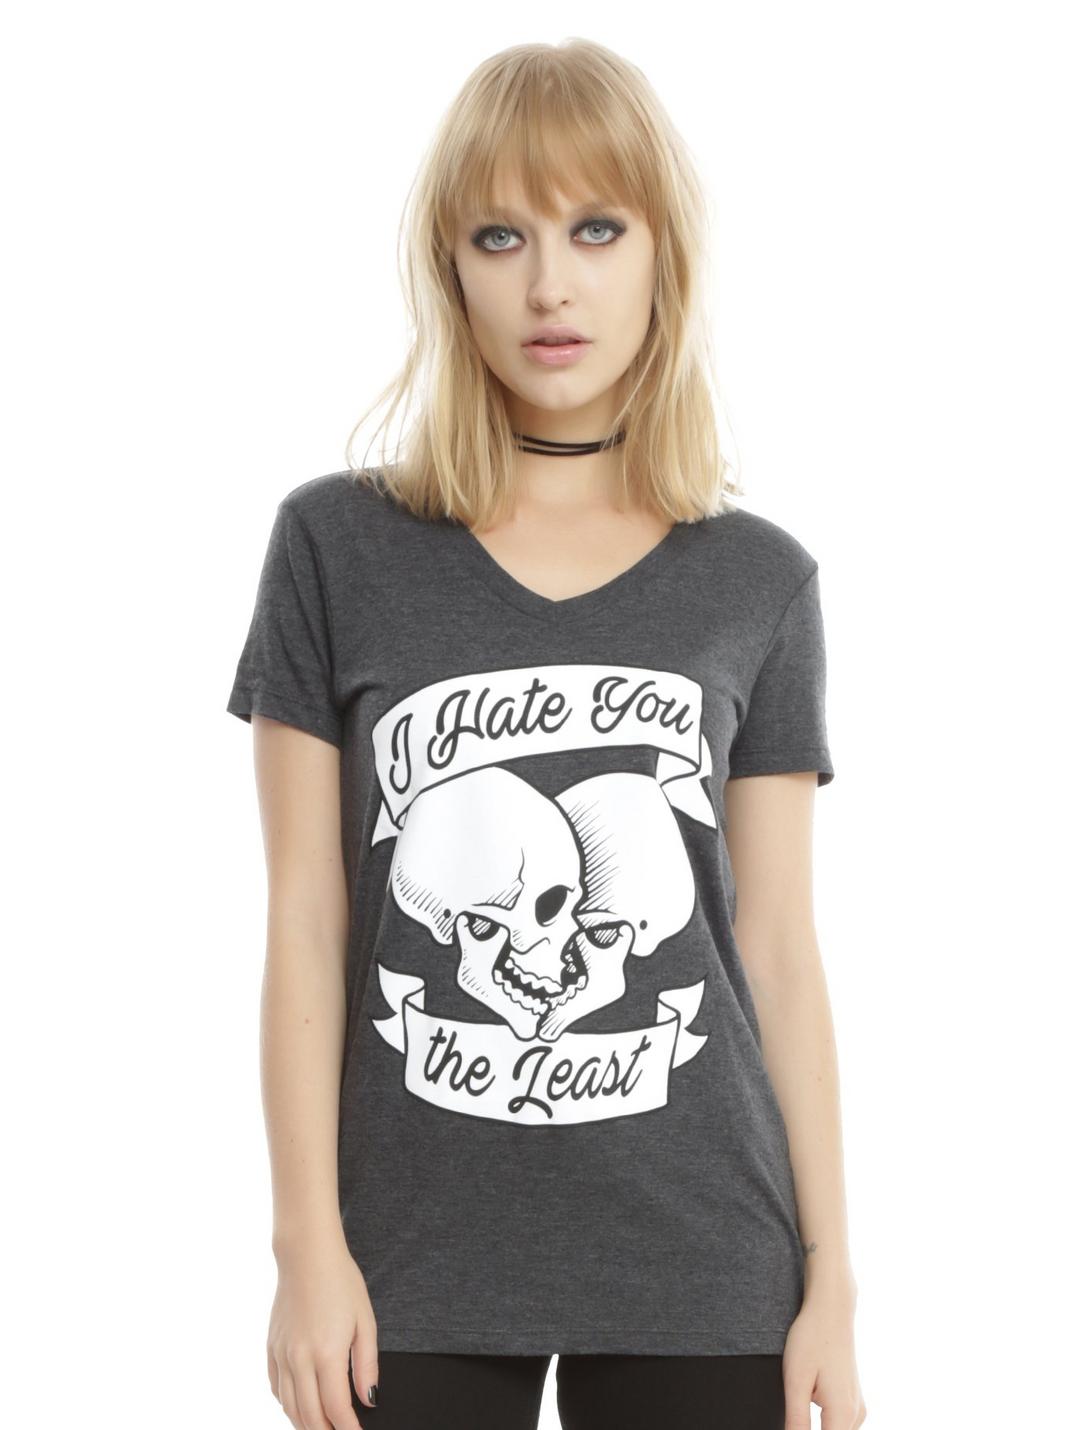 I Hate You The Least Girls T-Shirt, GREY, hi-res